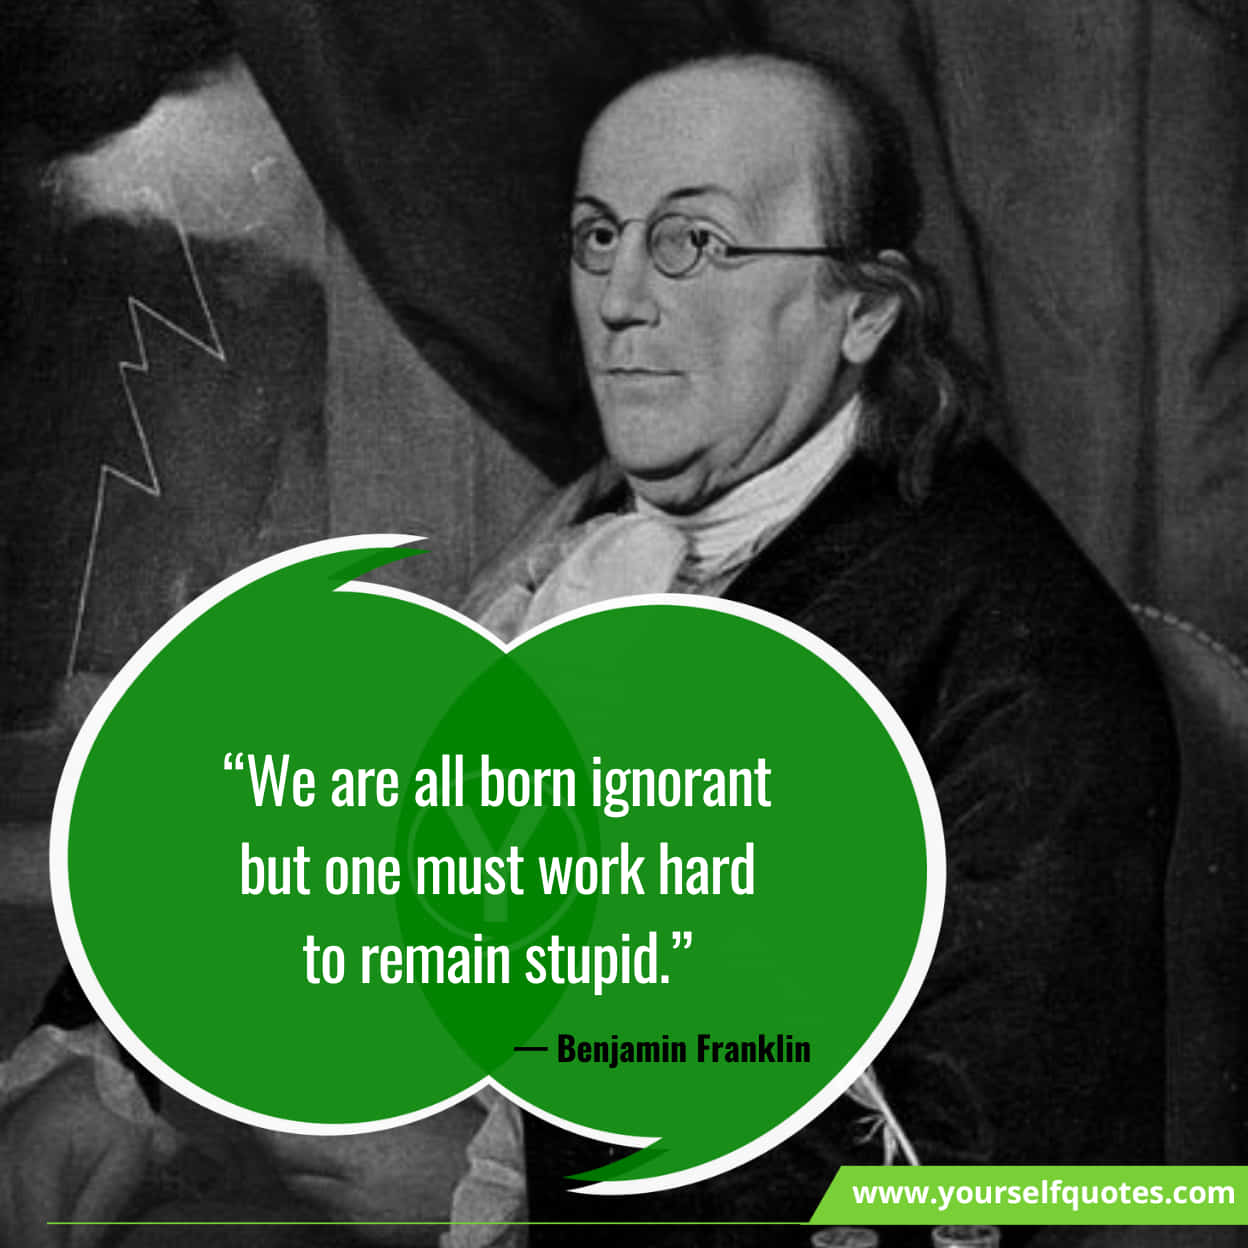 Benjamin Franklin Quotes On Life